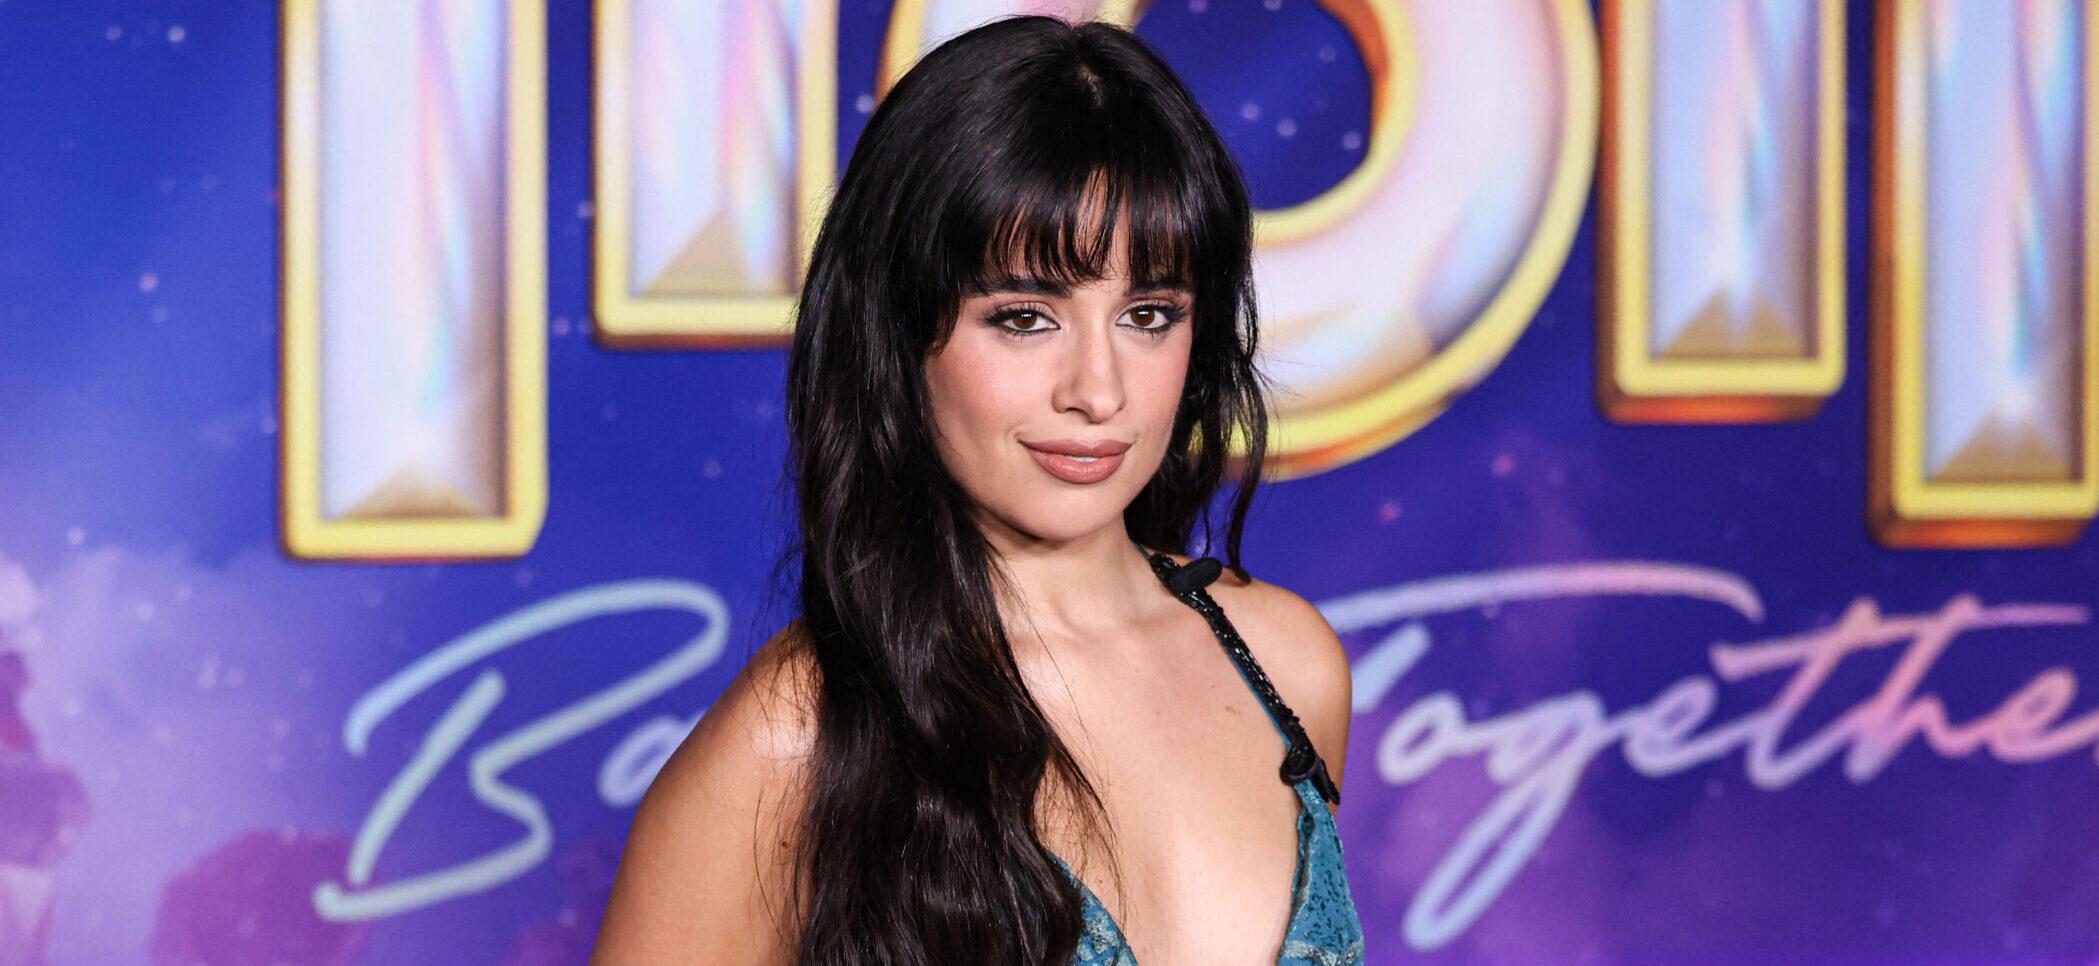 HOLLYWOOD, LOS ANGELES, CALIFORNIA, USA - NOVEMBER 15: Los Angeles Special Screening Of DreamWorks Animation And Universal Pictures' 'Trolls Band Together' held at TCL Chinese Theatre IMAX on November 15, 2023 in Hollywood, Los Angeles, California, United States. 16 Nov 2023 Pictured: Camila Cabello. Photo credit: Rudy Torres/Image Press Agency/MEGA TheMegaAgency.com +1 888 505 6342 (Mega Agency TagID: MEGA1060746_018.jpg) [Photo via Mega Agency]